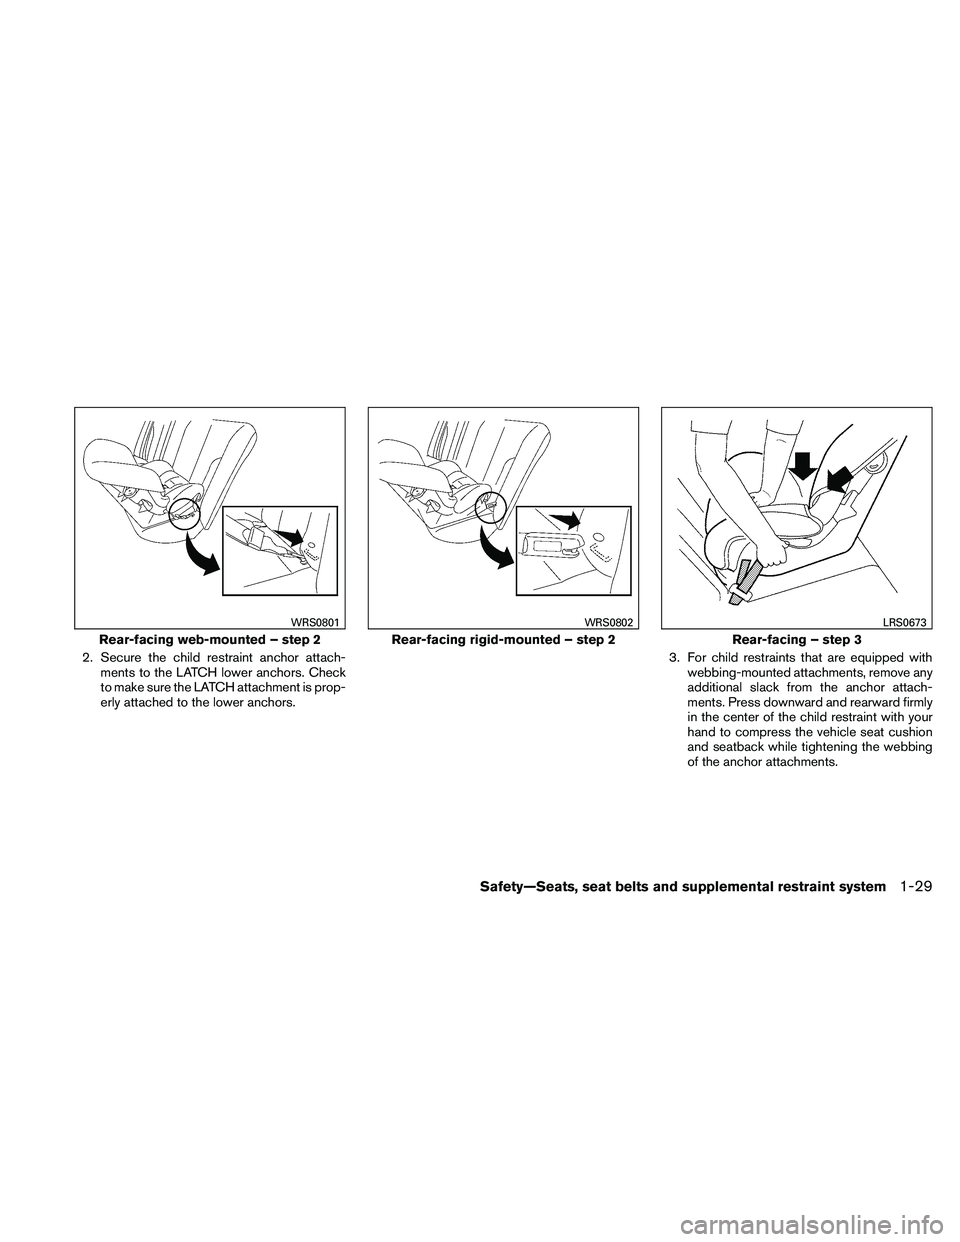 NISSAN FRONTIER 2011  Owner´s Manual 2. Secure the child restraint anchor attach-ments to the LATCH lower anchors. Check
to make sure the LATCH attachment is prop-
erly attached to the lower anchors. 3. For child restraints that are equi